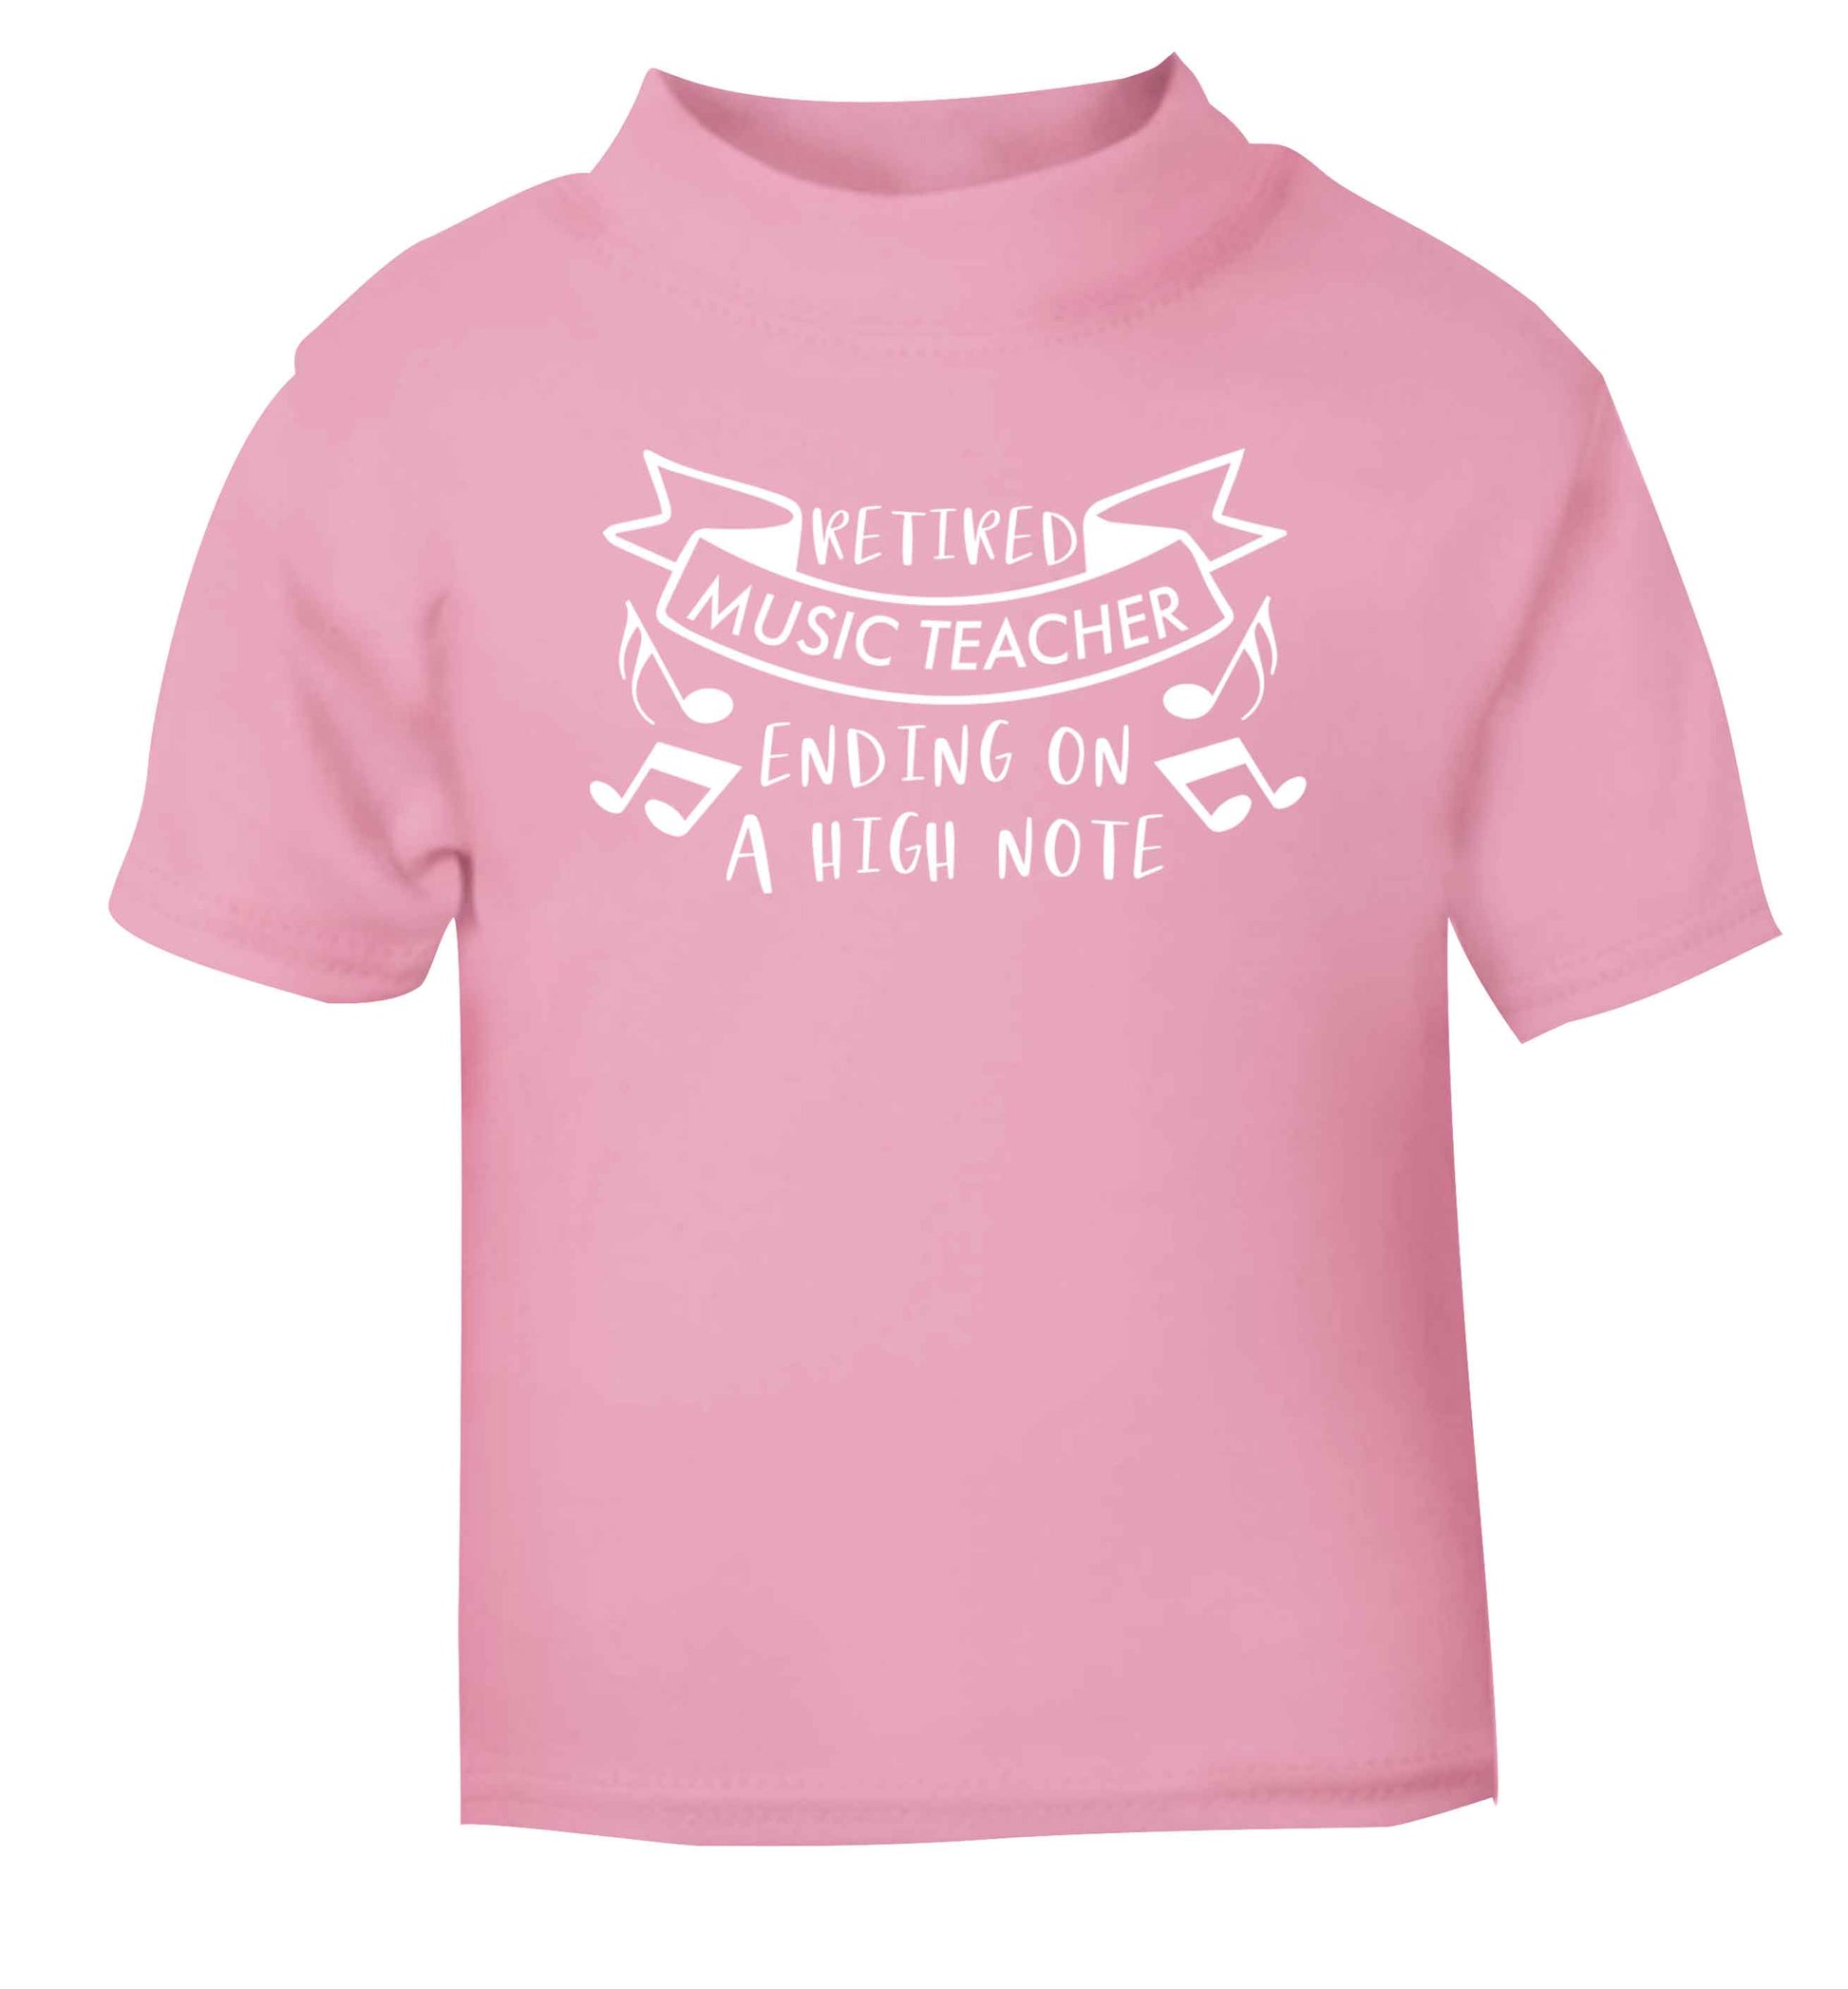 Retired music teacher ending on a high note light pink Baby Toddler Tshirt 2 Years